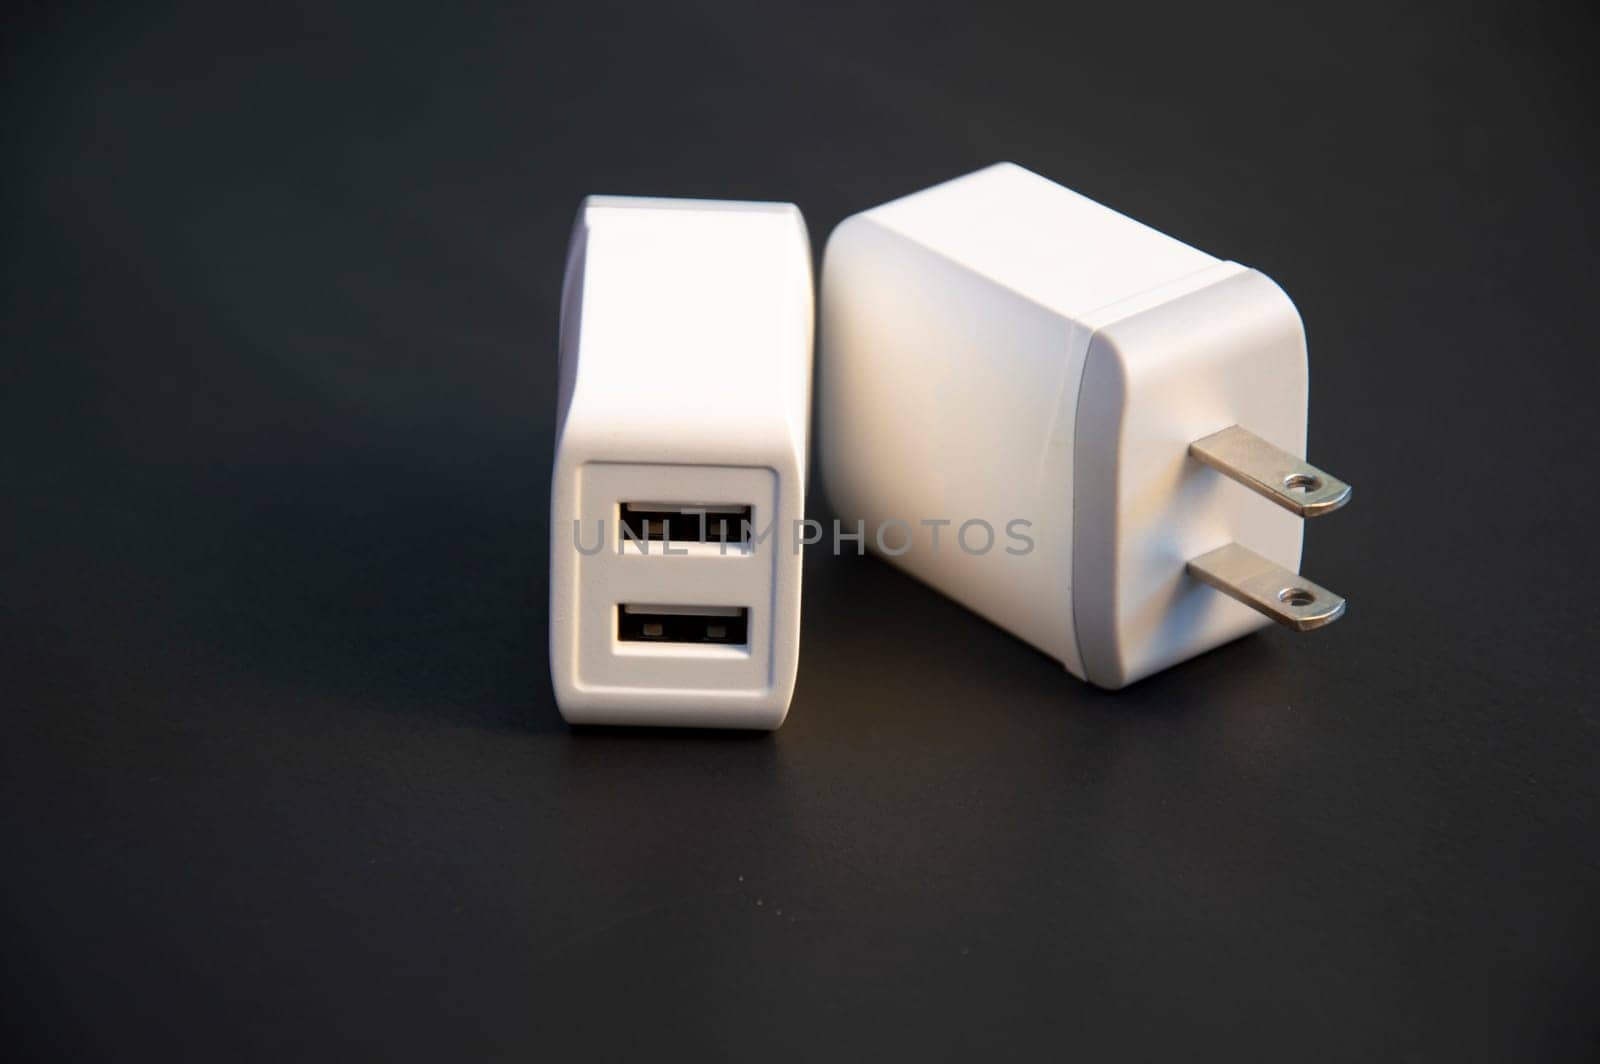 USB charger, white, 2-port type, placed on a black background by boonruen